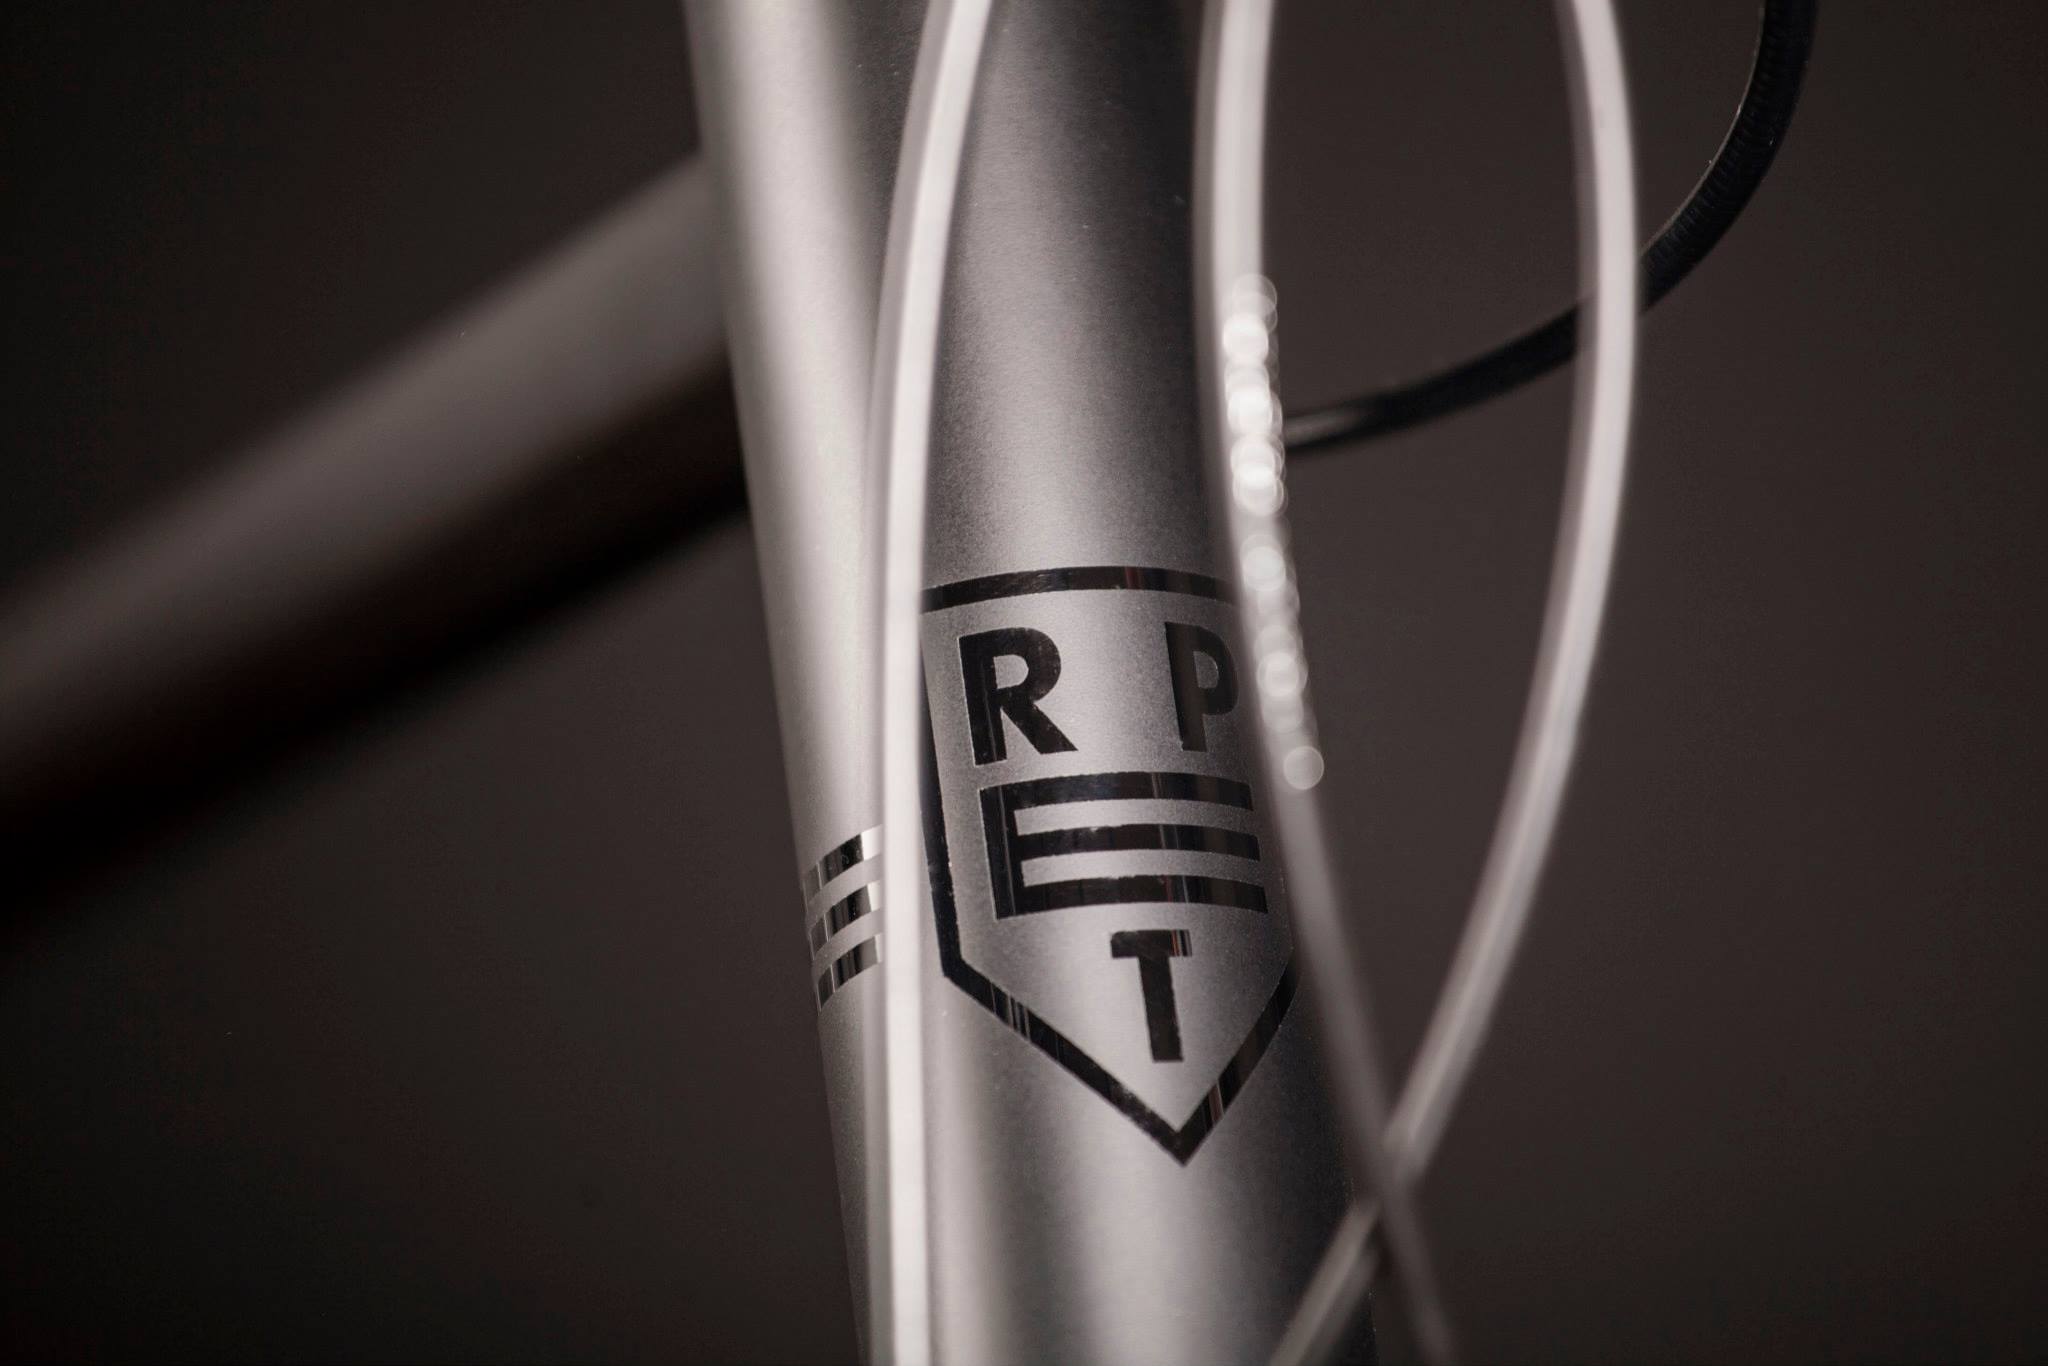 Found: Repete Cycles Handmade Columbus Steel Frames From The Czech Republic